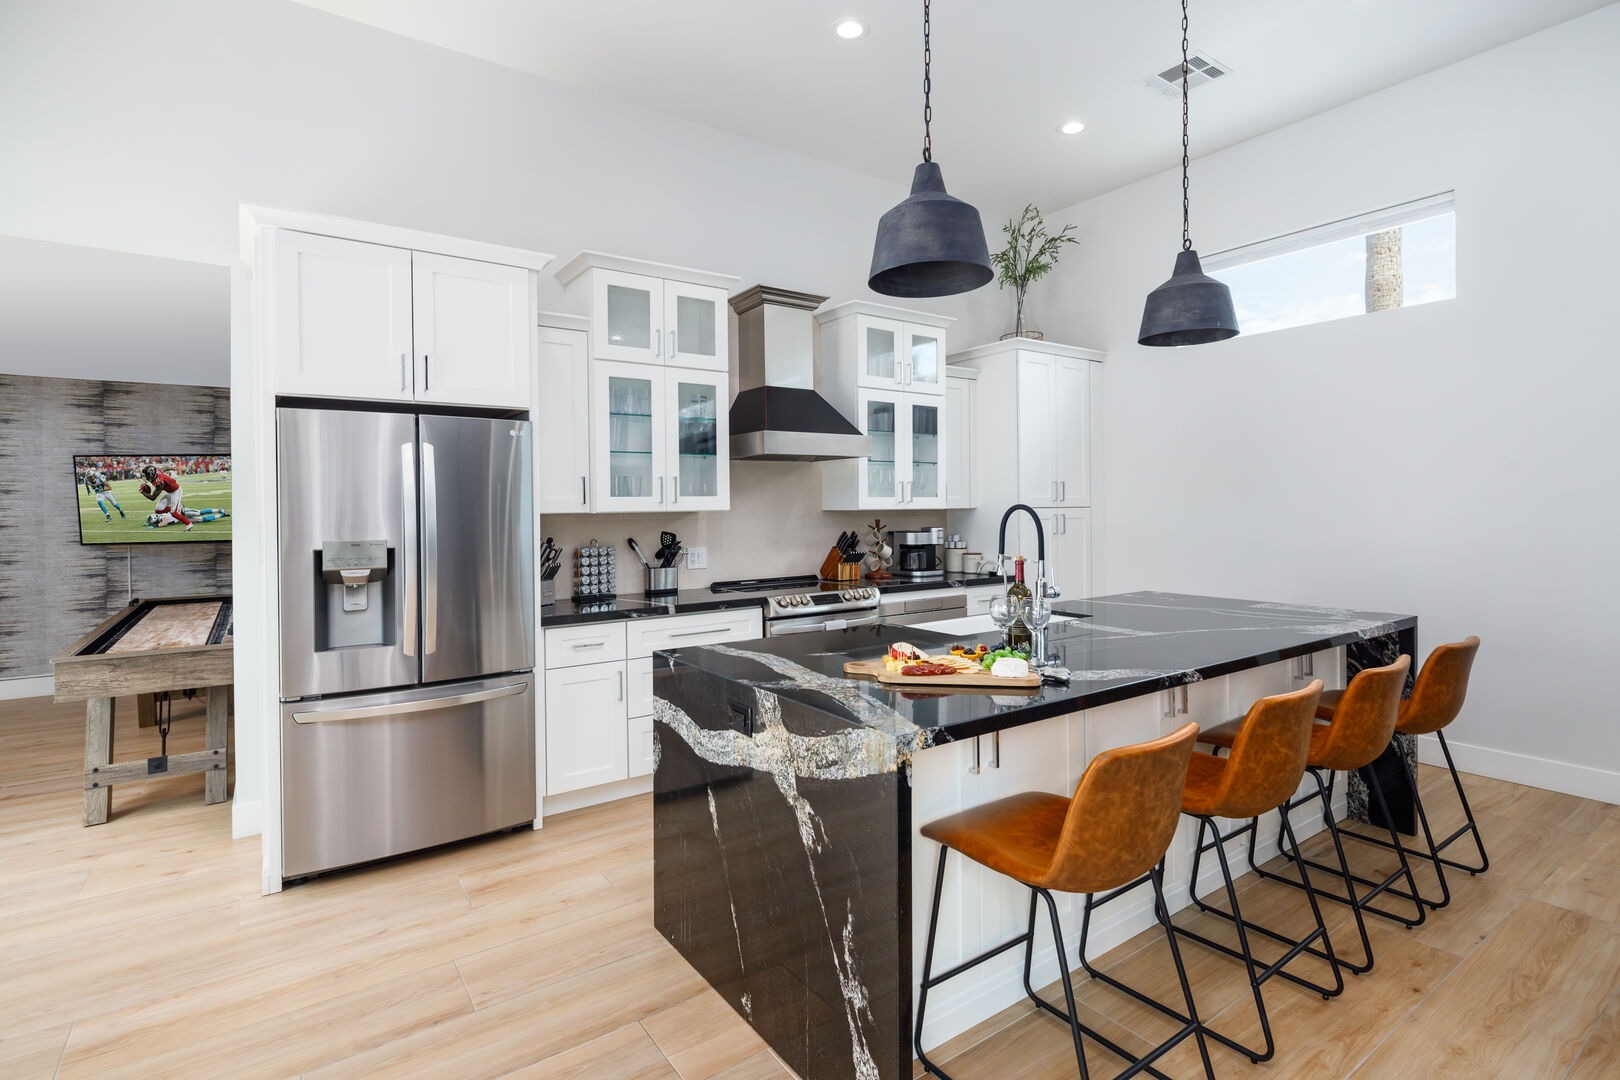 Gourmet style kitchen with stainless steel appliances stocked with your basic cooking essentials. Features large island with breakfast bar seating.